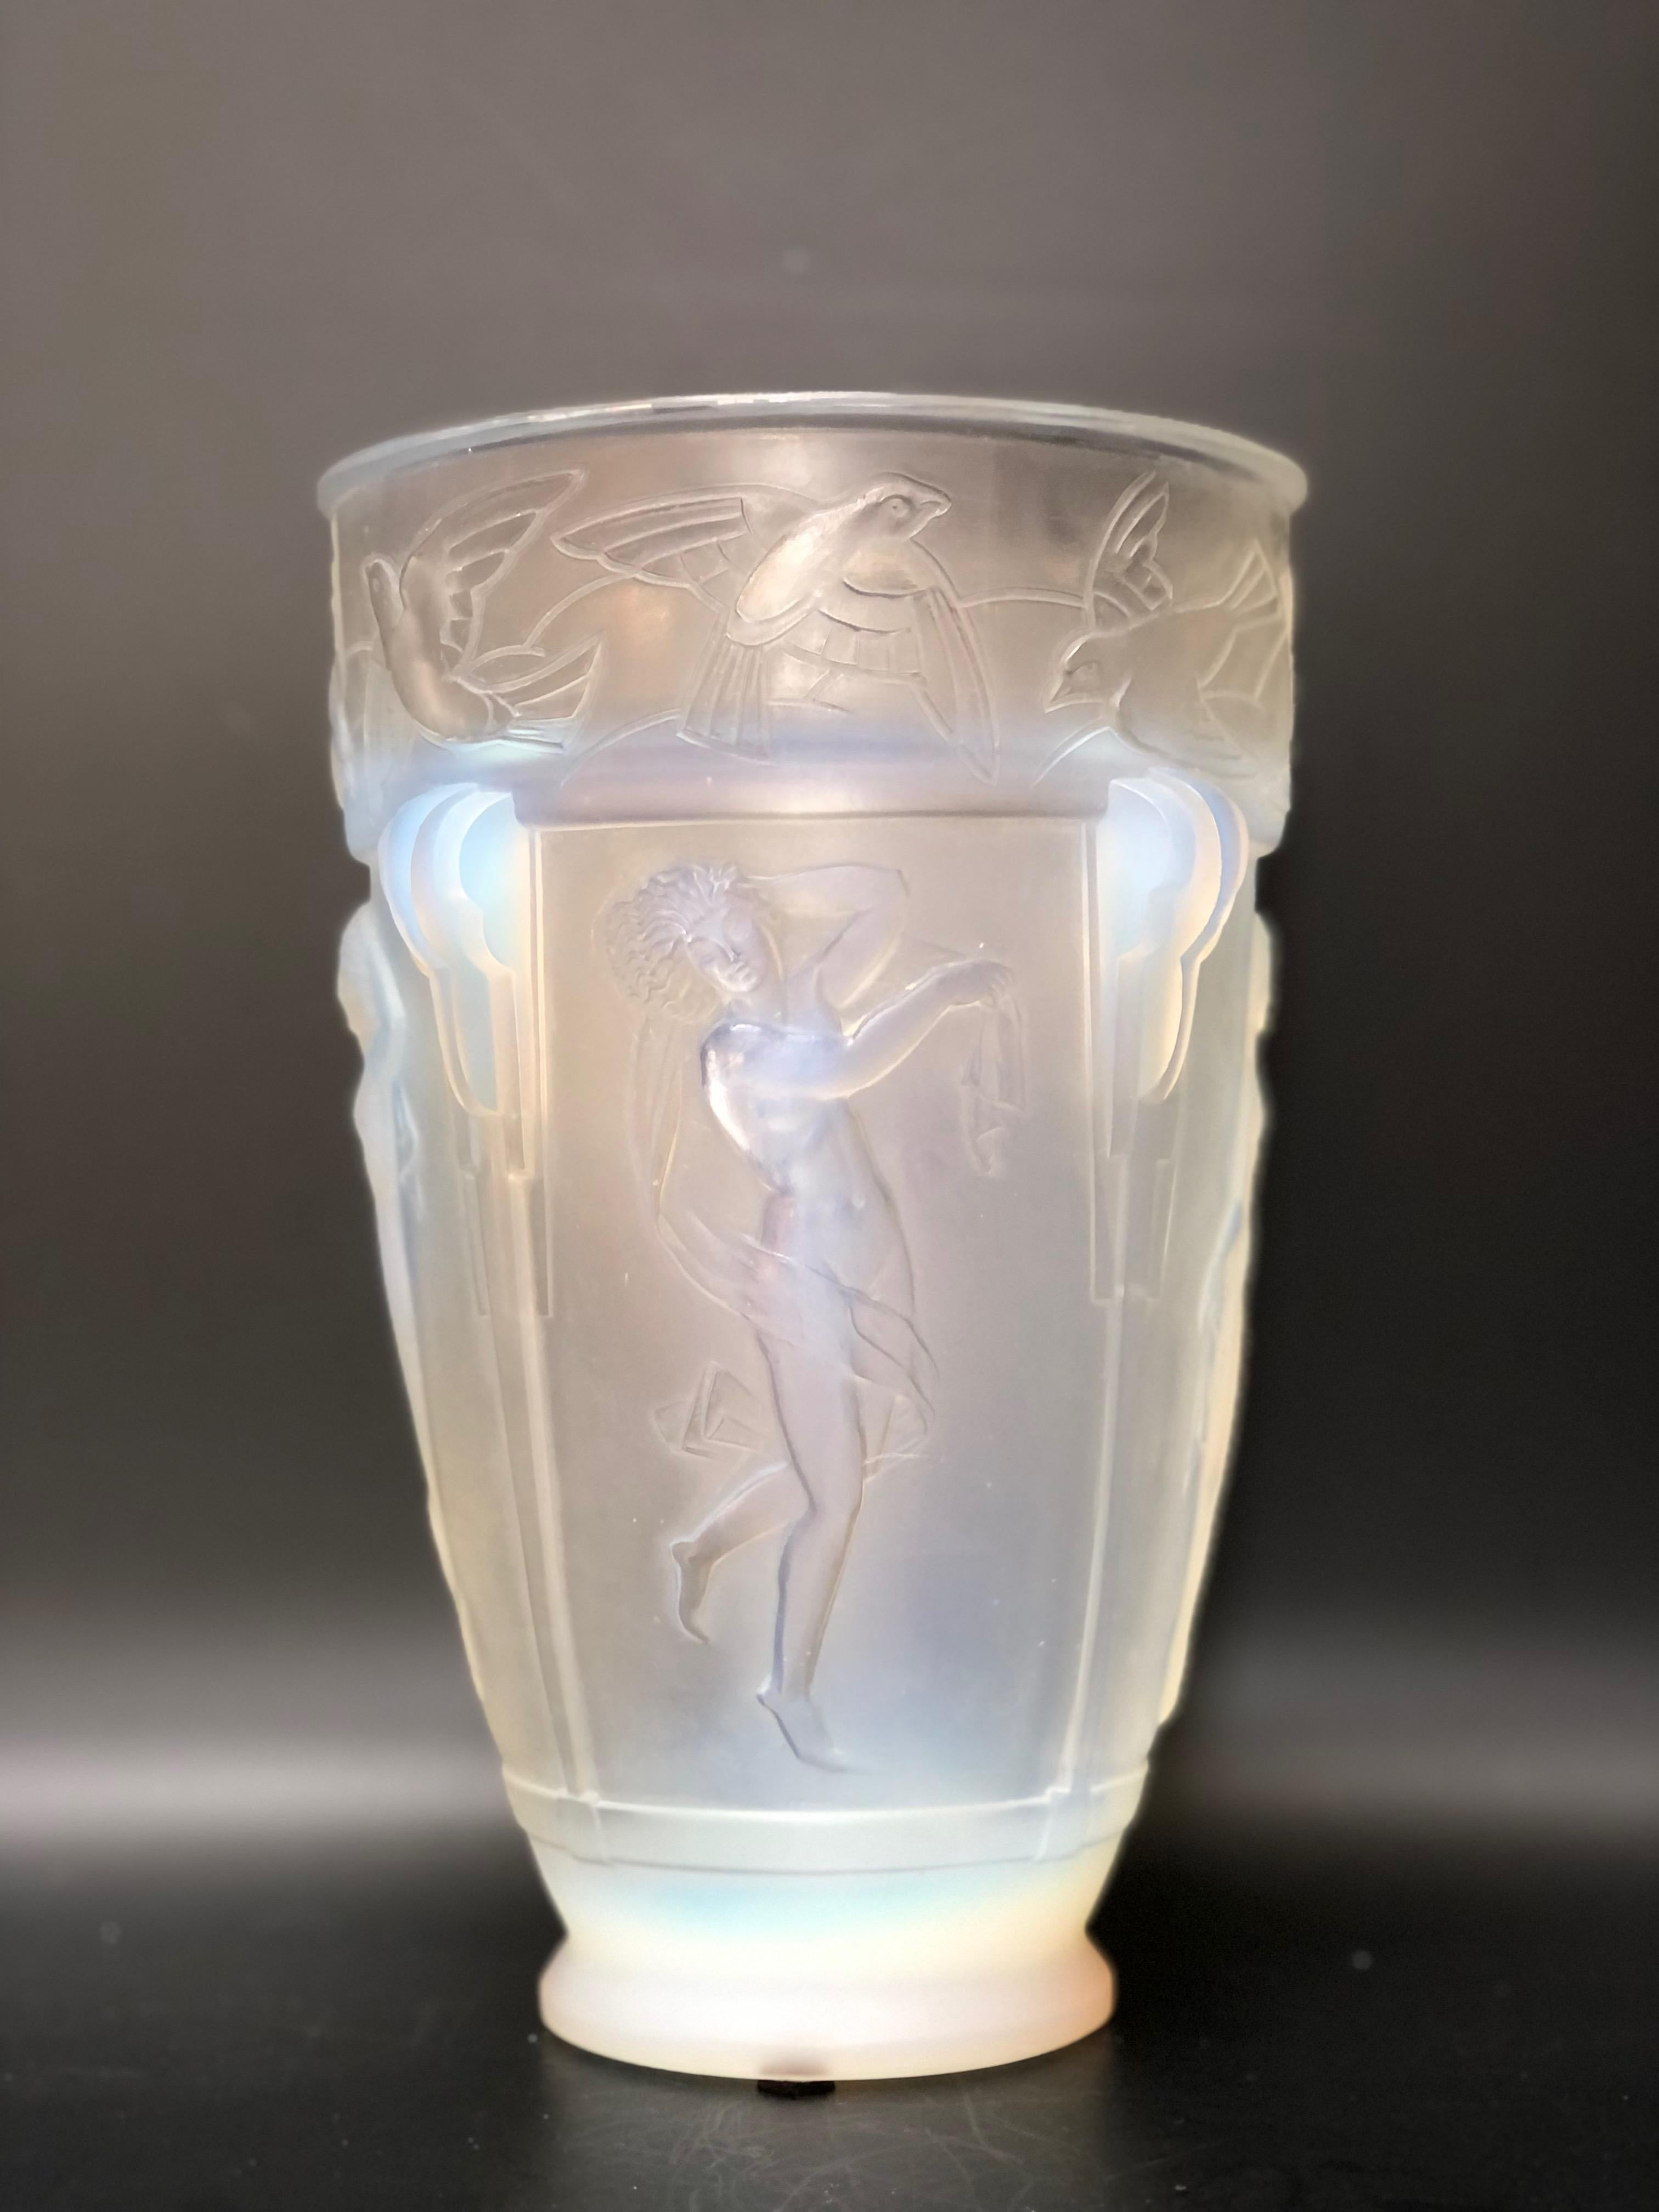 Sabino art deco vase circa 1930 in opalescent molded glass. 
Frieze decoration of a dancing woman and birds.
In perfect condition.
Height: 22.8 cm 
Diameter: 15 cm

MARIUS-ERNEST SABINO, THE SCULPTOR BECAME MASTER GLASS MAKER OF ART DECO
We